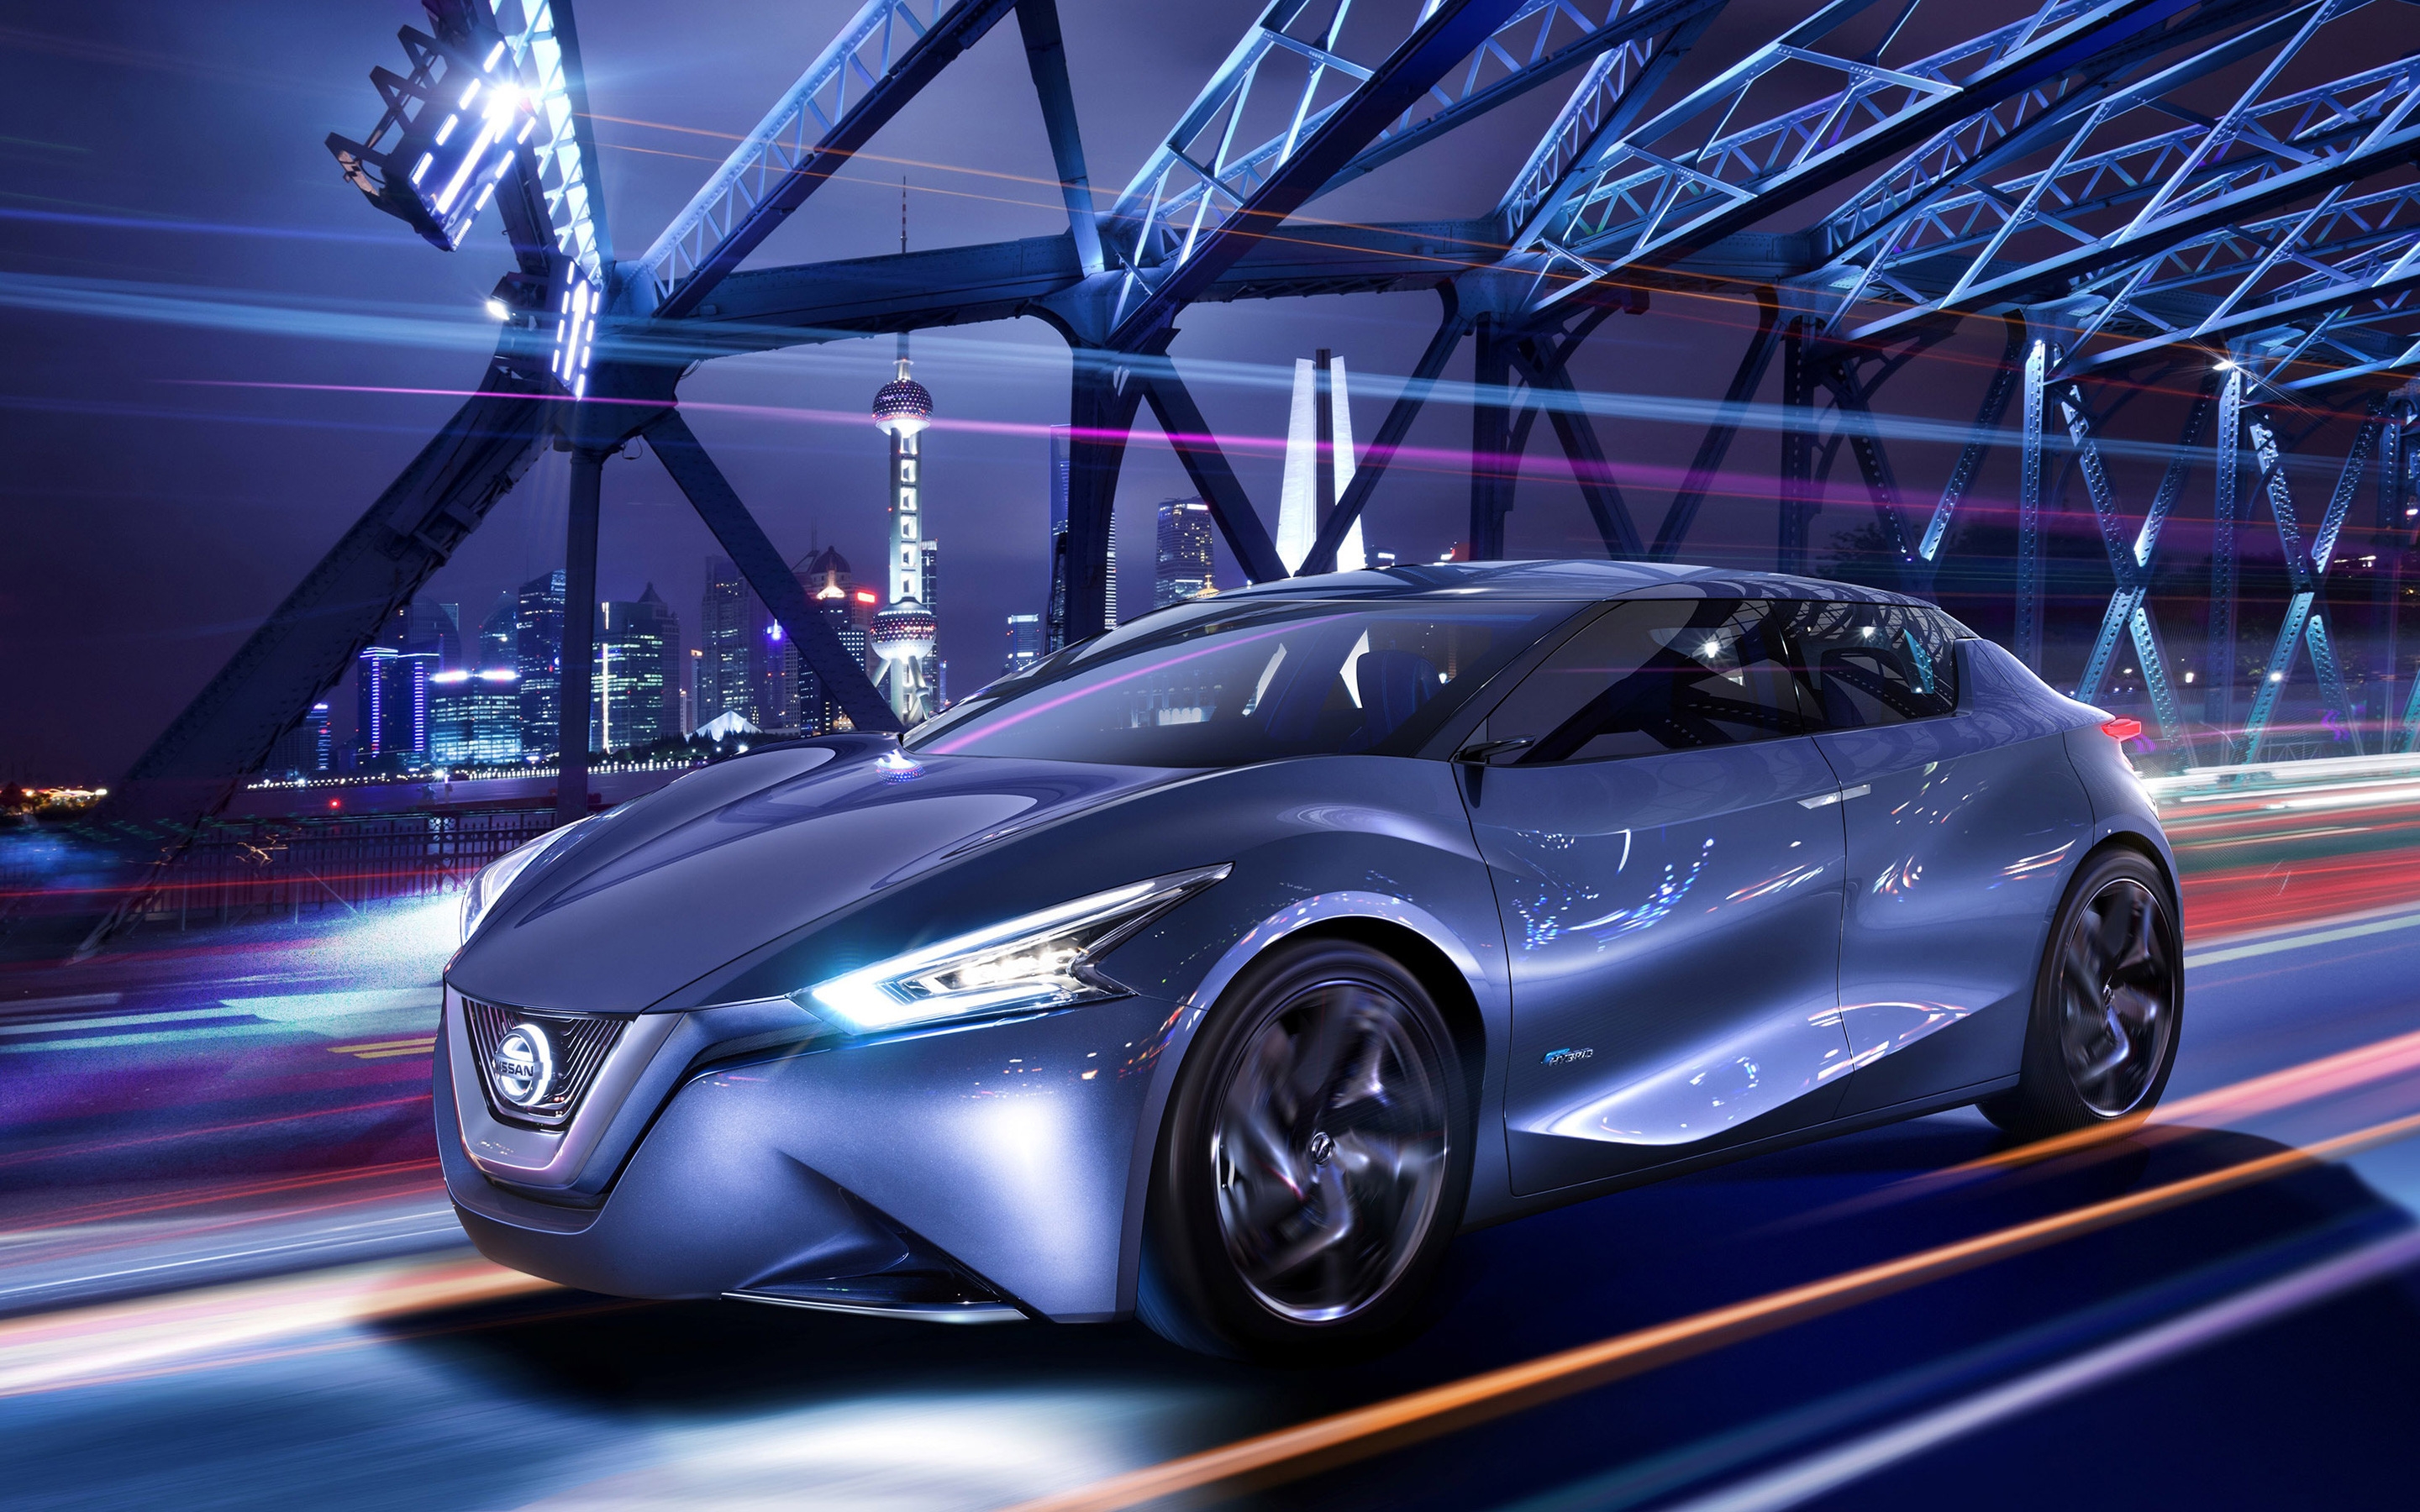 Nissan Friend Me Concept for 2880 x 1800 Retina Display resolution